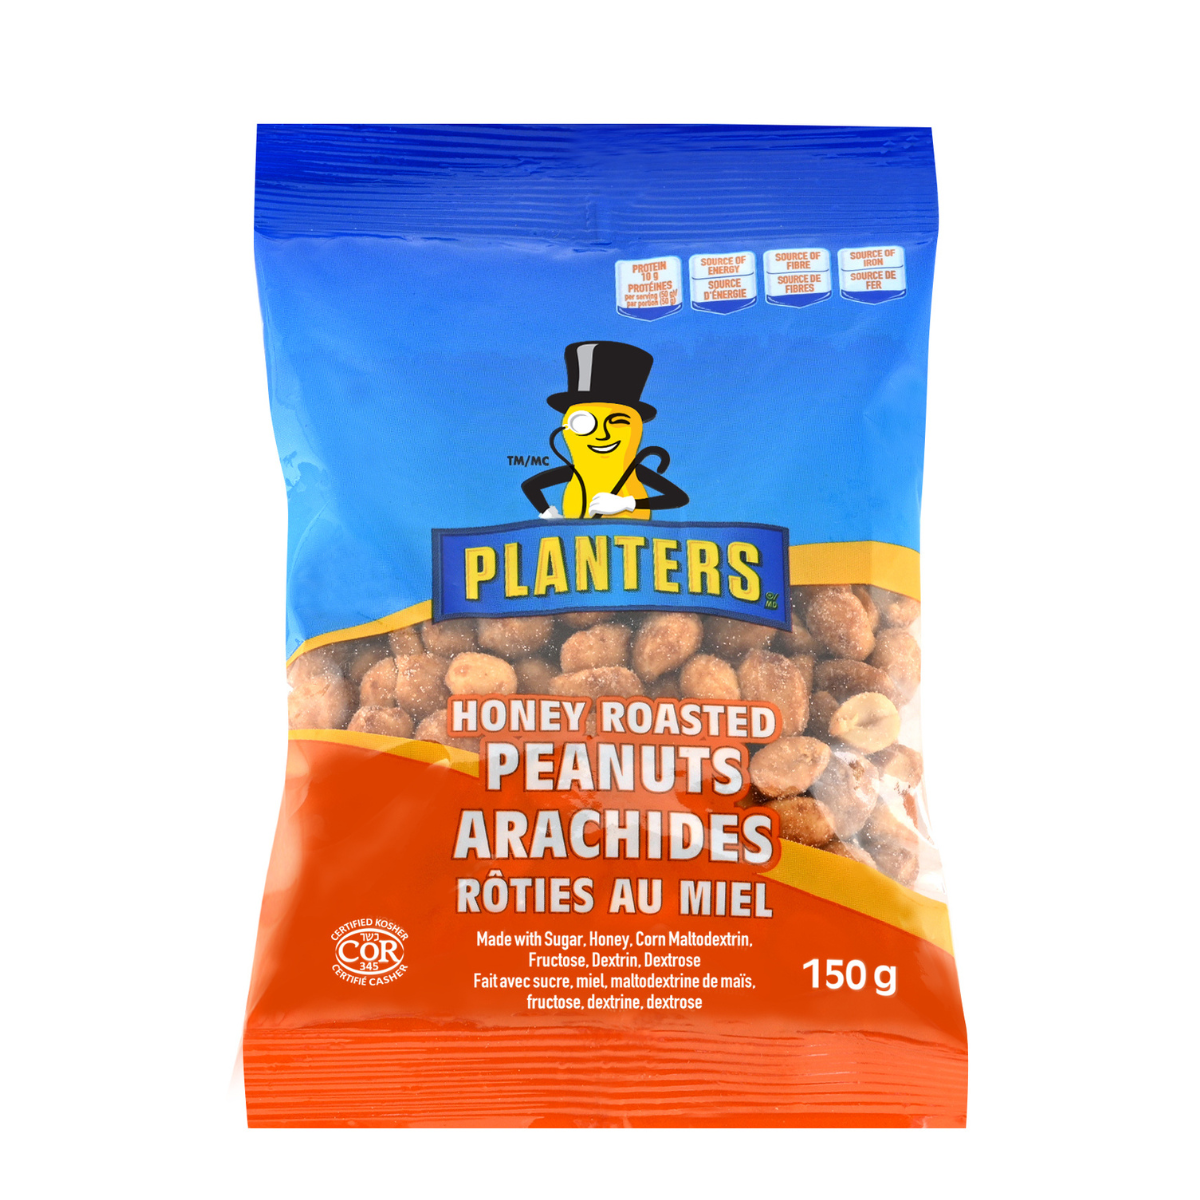  PLANTERS Honey Roasted Mixed Nuts